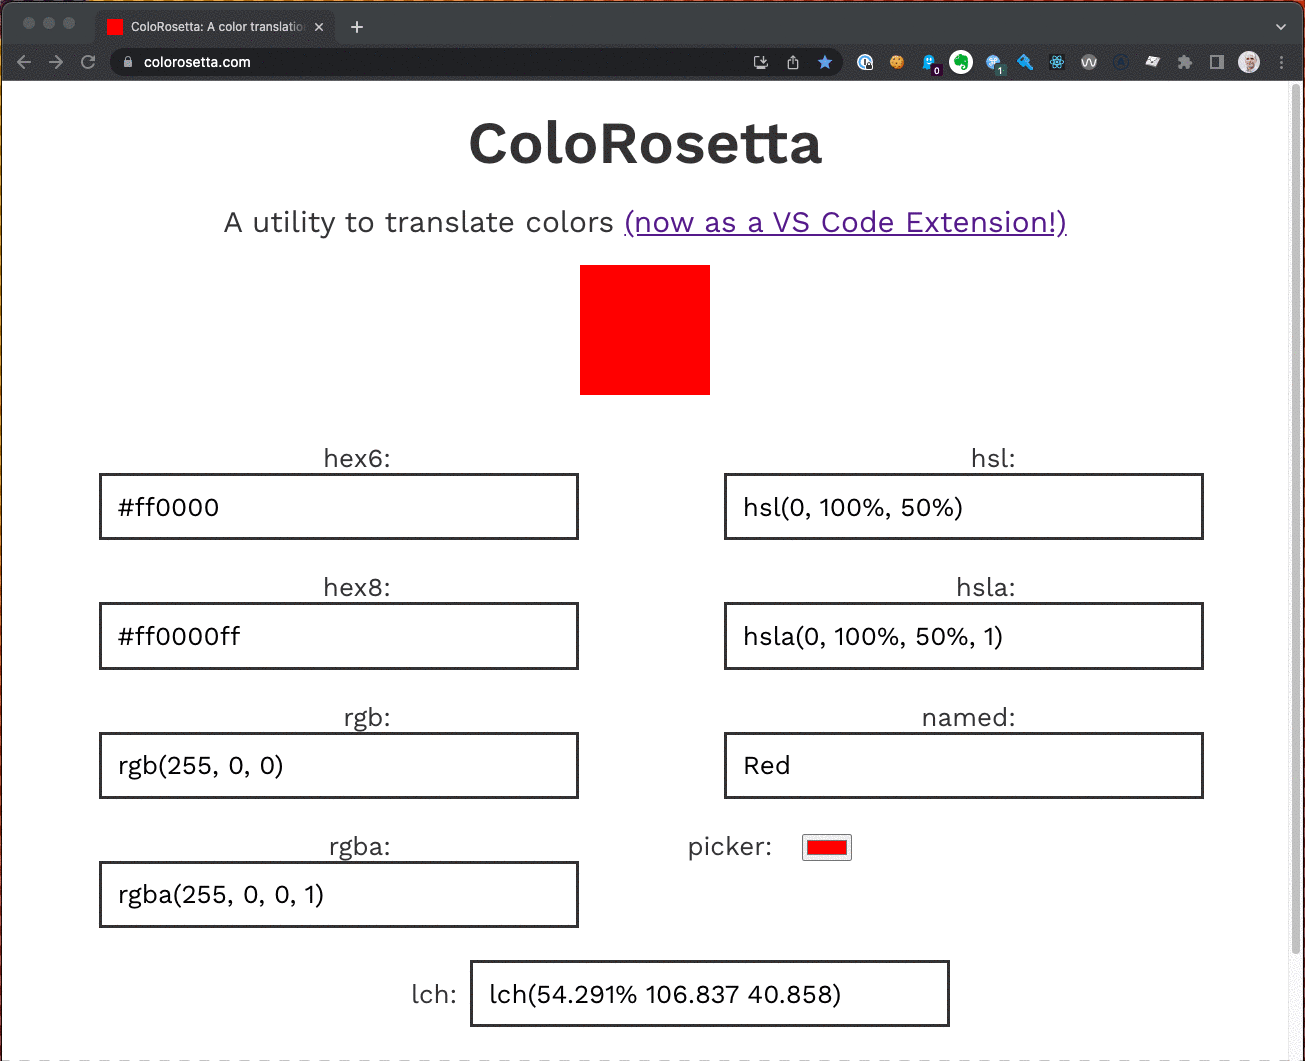 The favicon changing color as the user updates the color of ColoRosetta